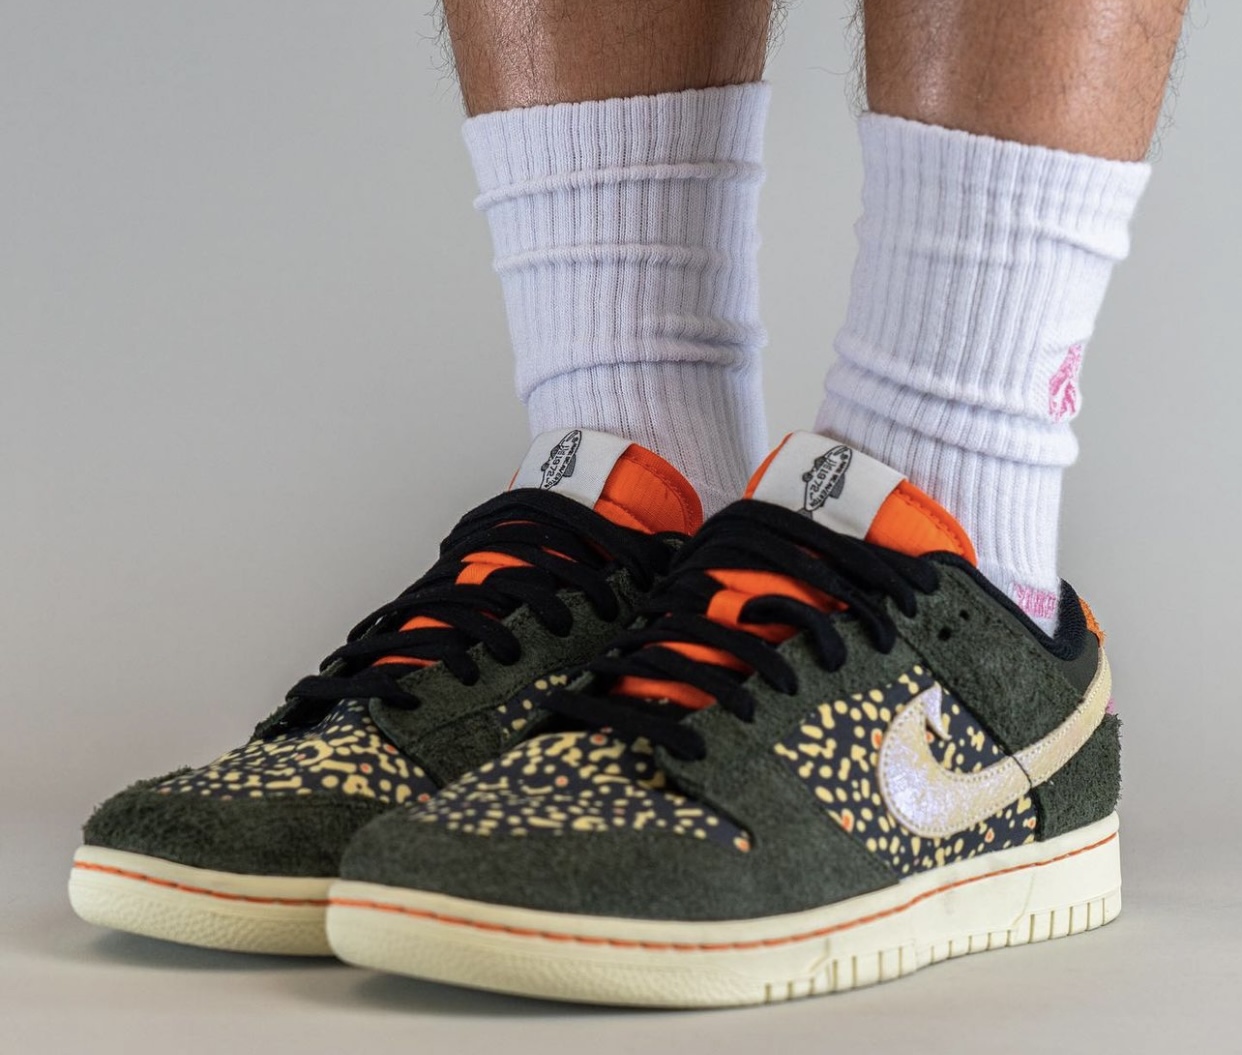 On-Feet Photos of the Nike Dunk Low Rainbow Trout 